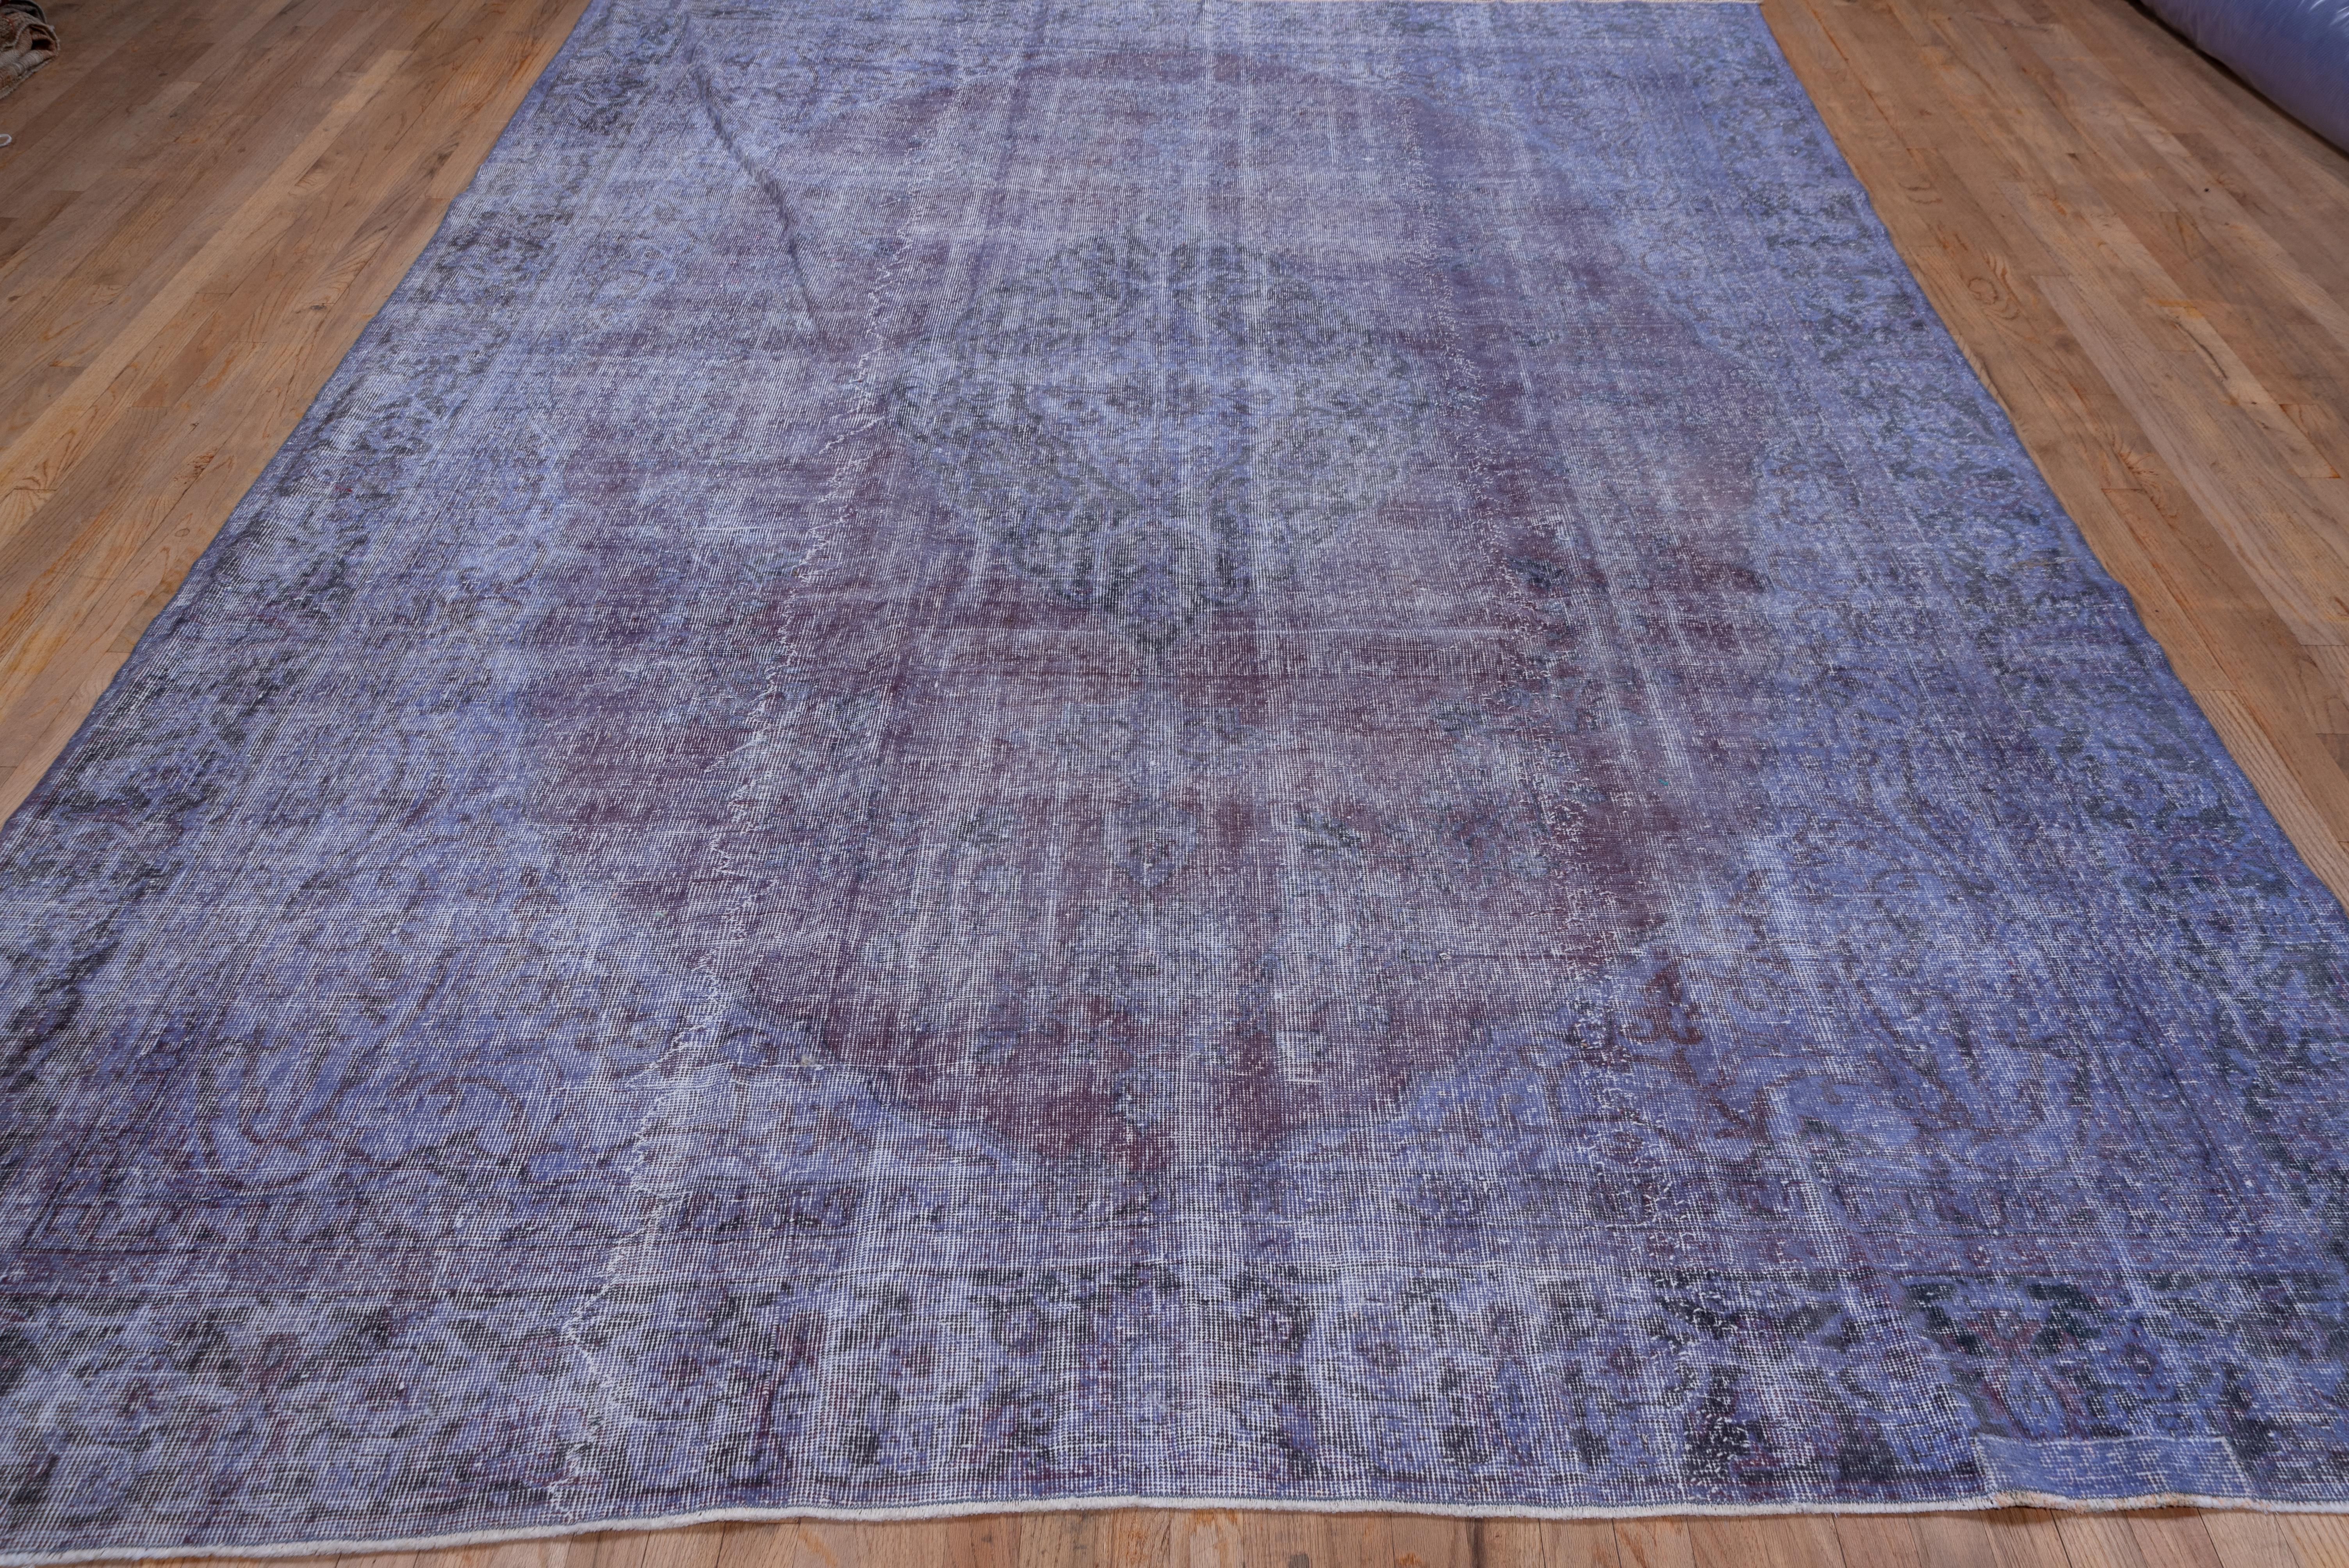 This clearly distressed carpet has been over dyed in a medium violet uniforming the original medallion and corners layout still visible on the back. The white of the foundation adds another distinct color to an otherwise monochrome palette.